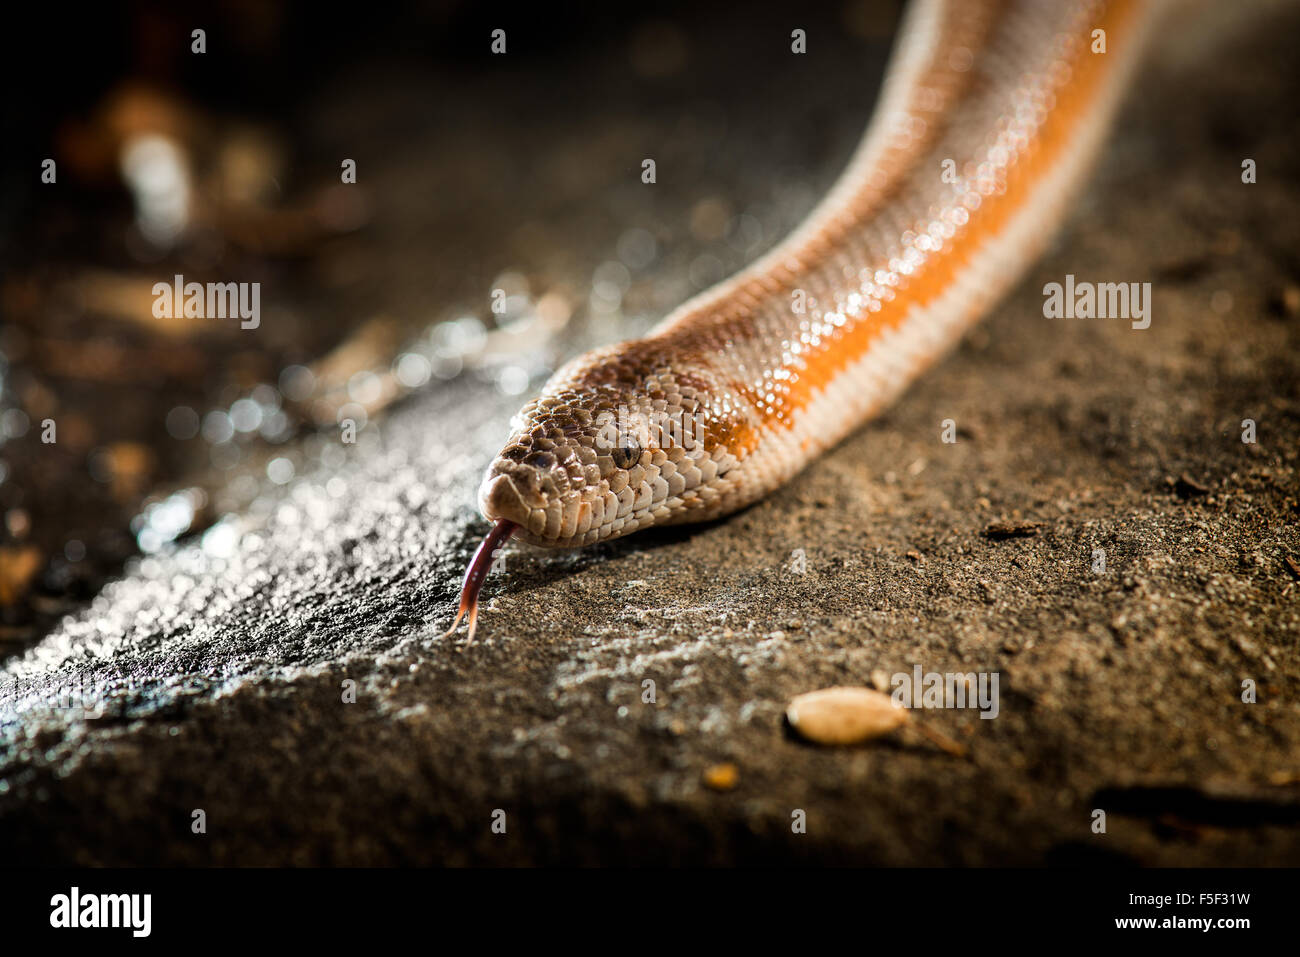 A rosy boa slithering across a rock Stock Photo